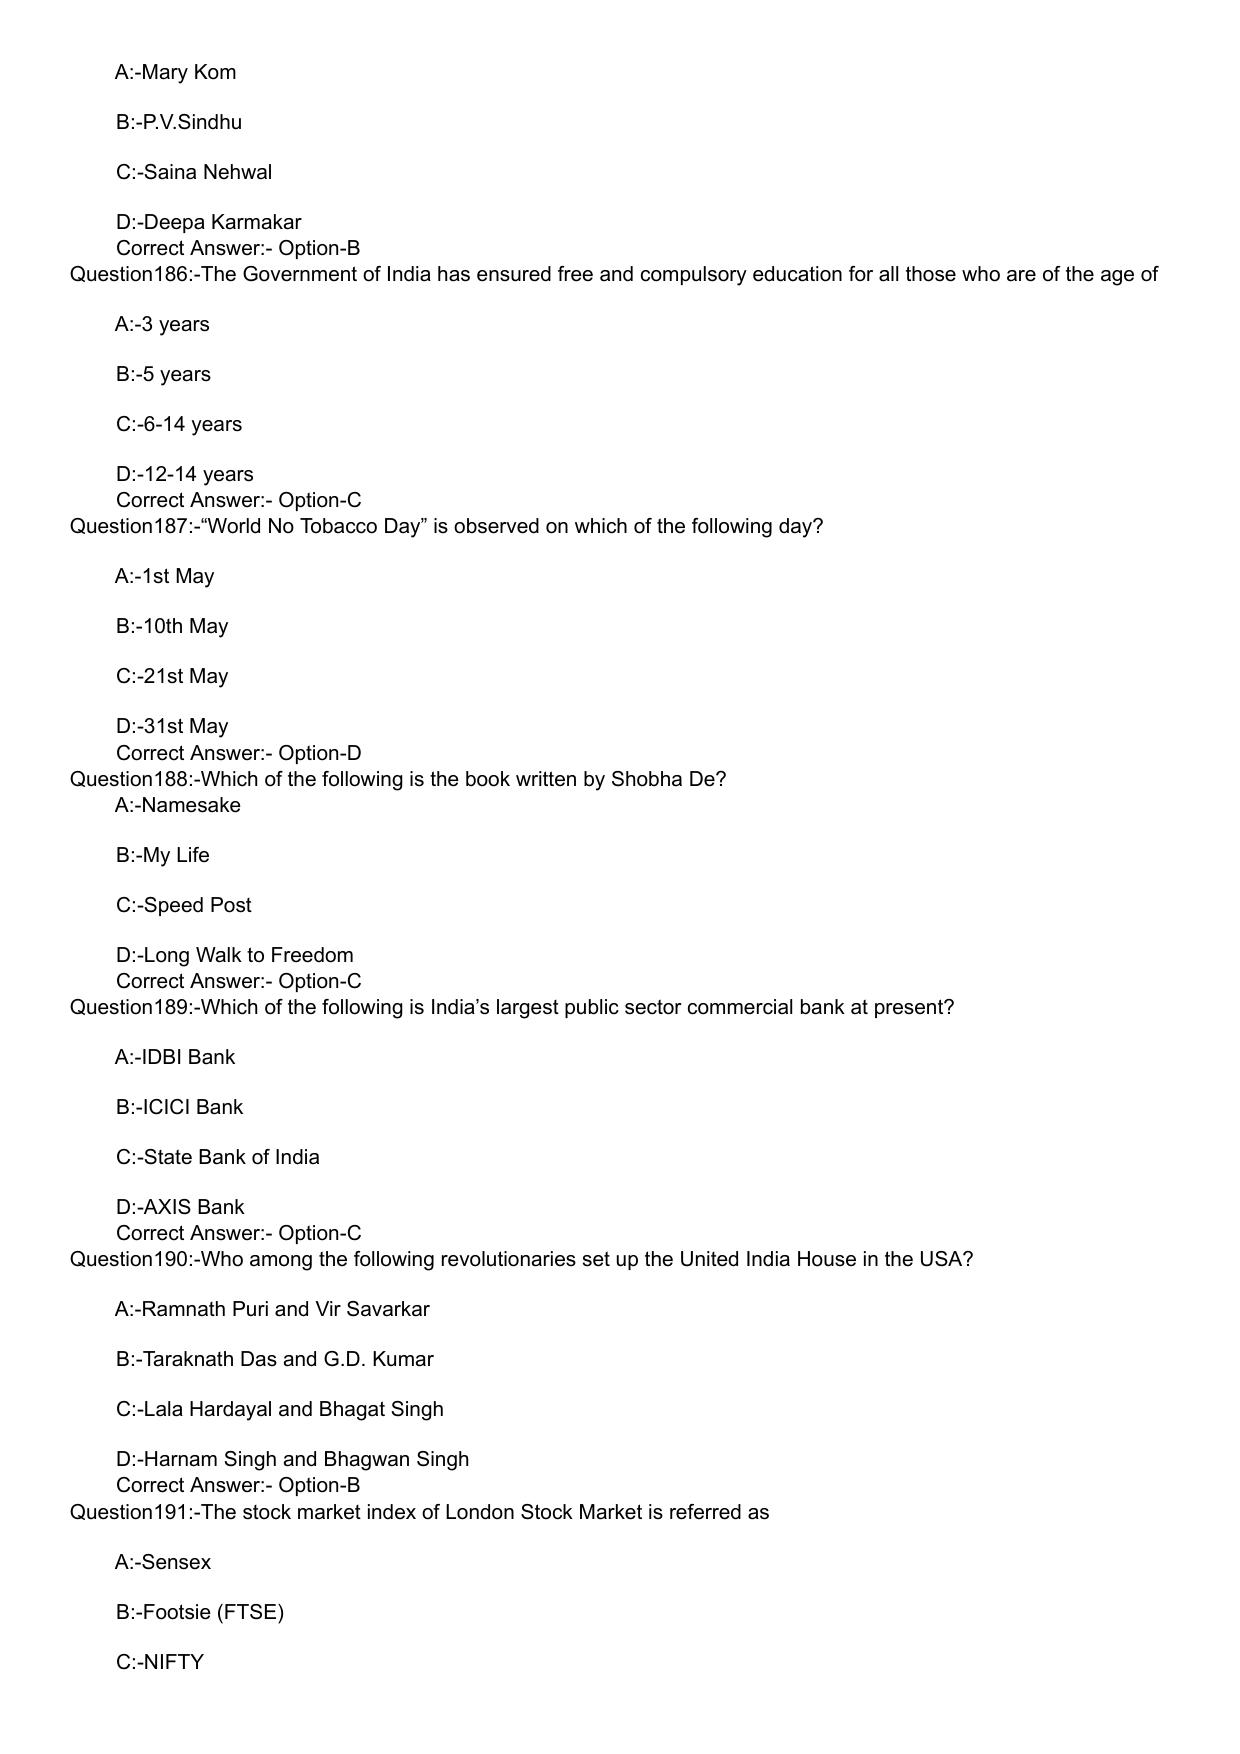 KLEE 5 Year LLB Exam 2020 Question Paper - Page 32